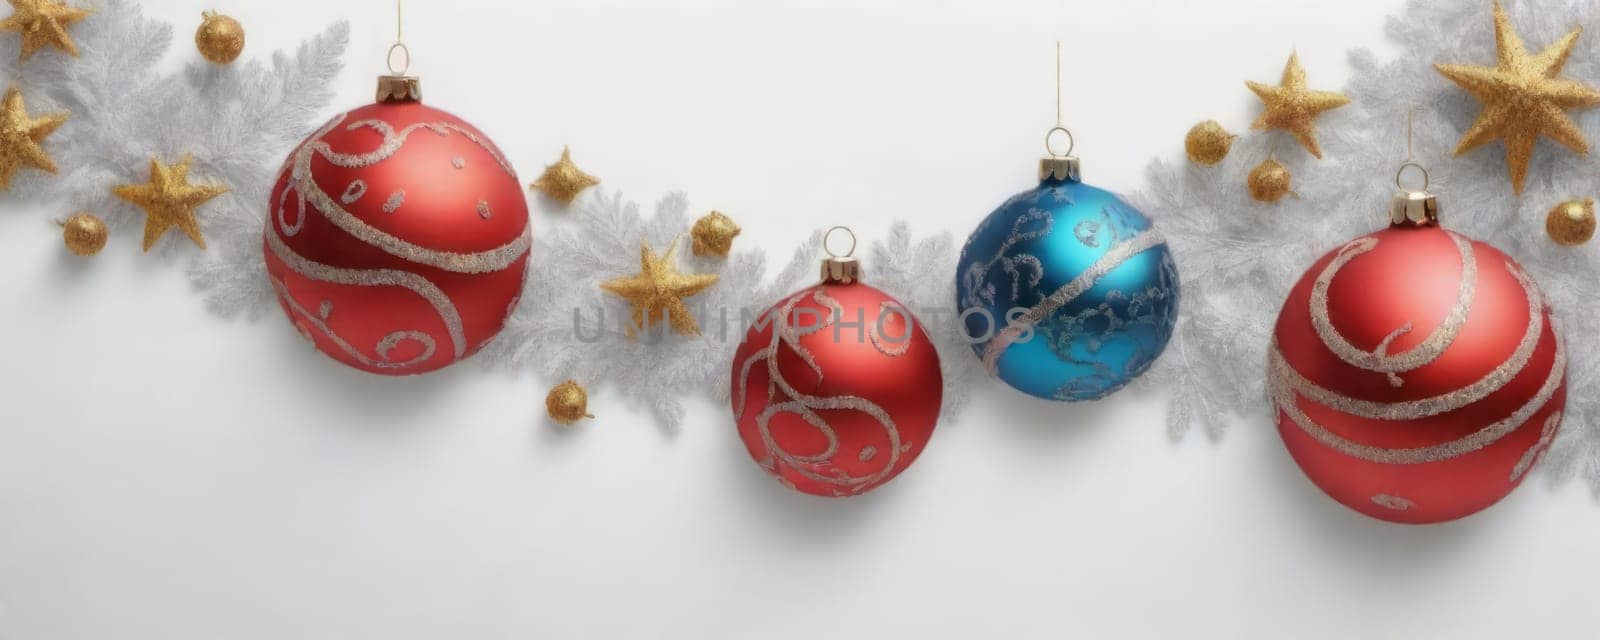 Festive Christmas Ornaments and Stars by nkotlyar